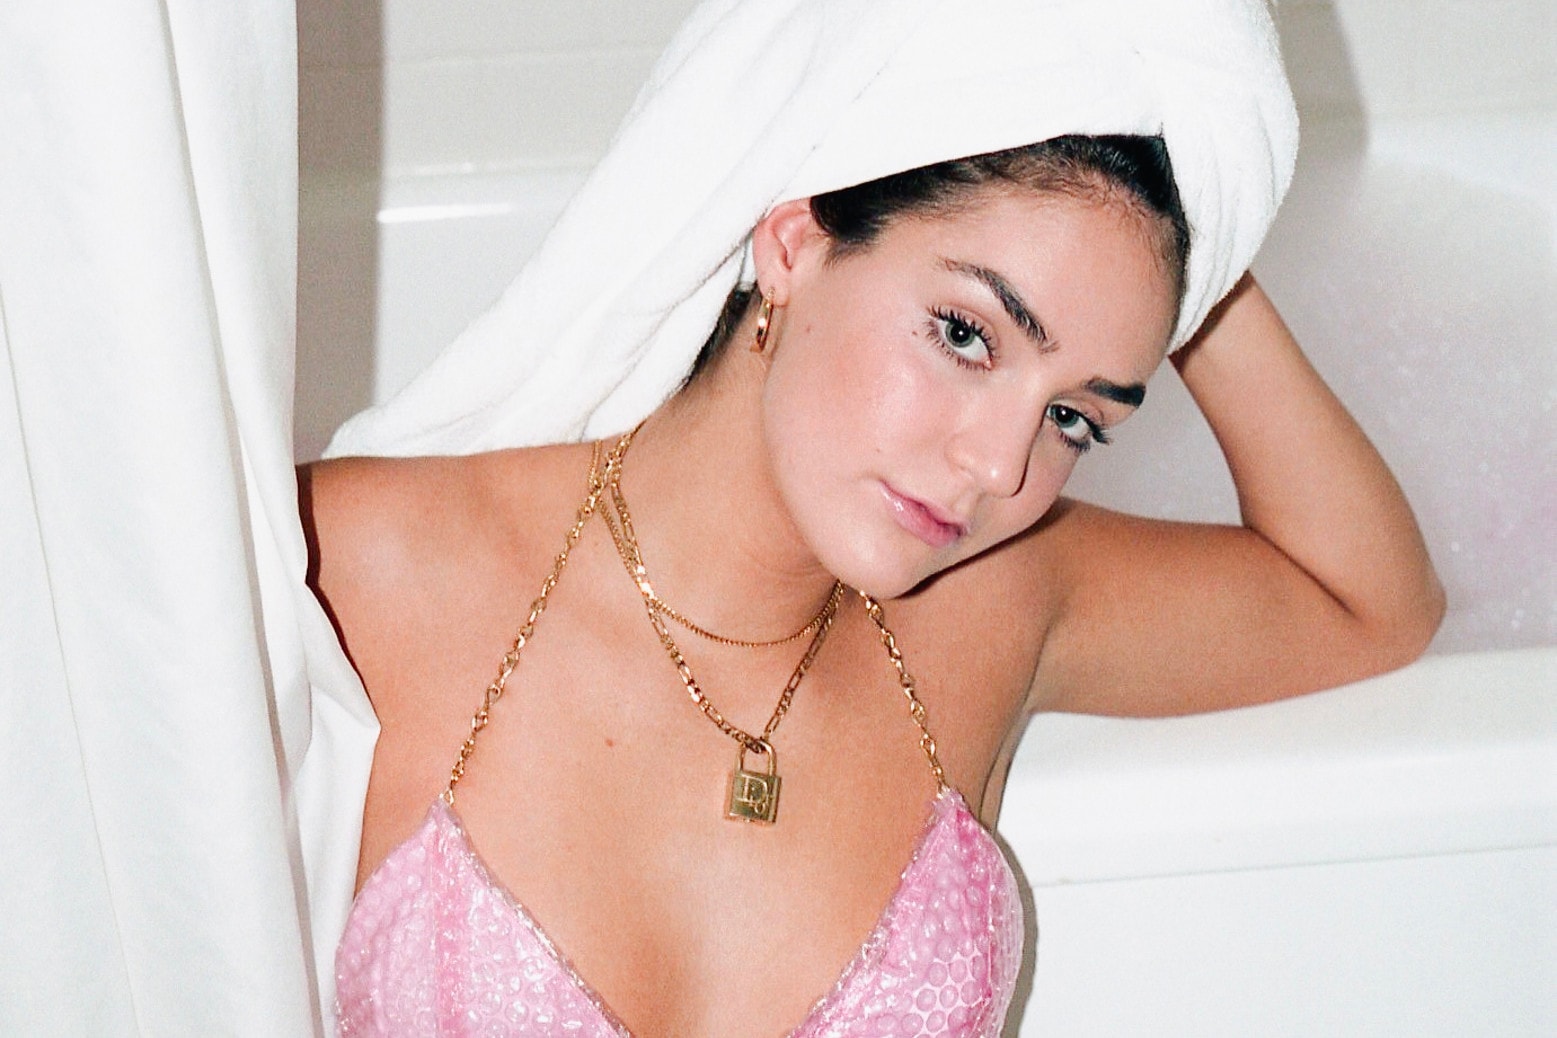 Glossier Pink Pouch Bikini Top Rework Gold Chain Frankie Collective Necklace Towel Skincare Beauty Makeup Editorial Bathroom